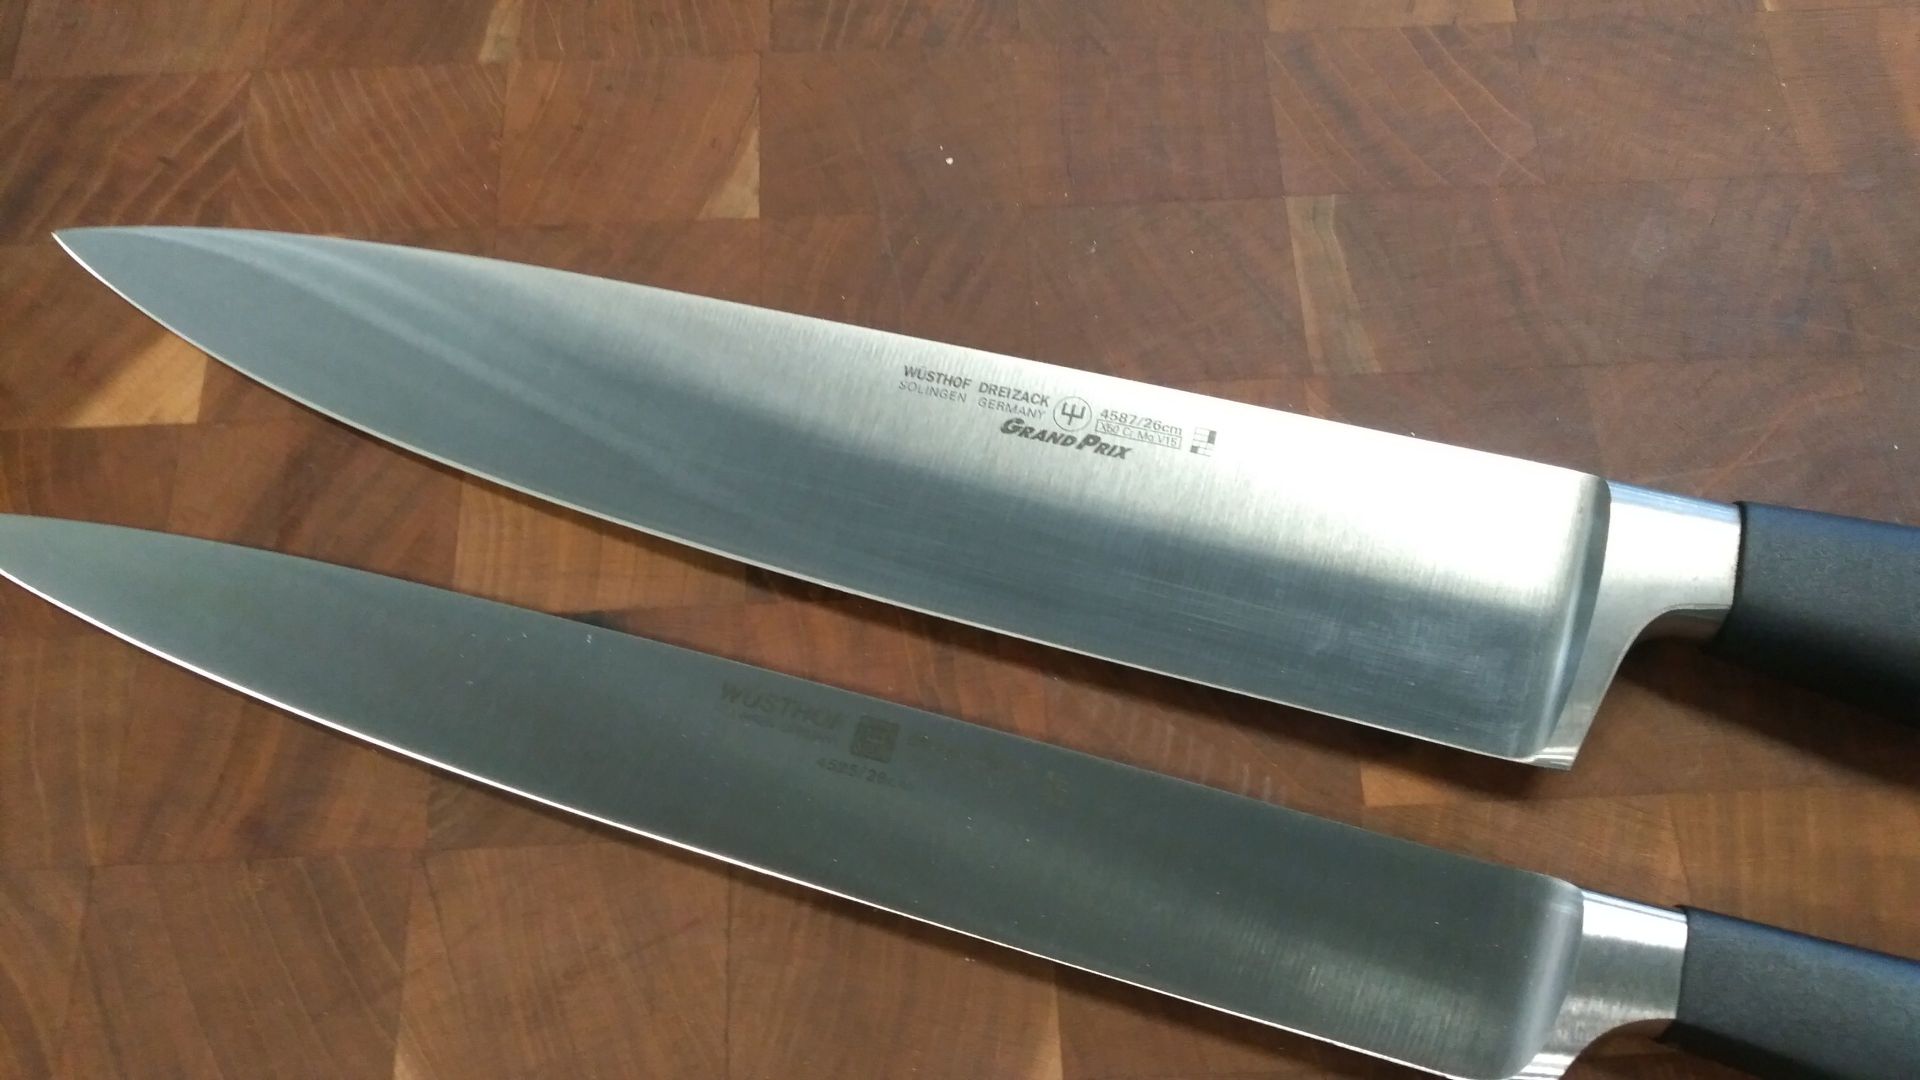 Wusthoff Grand Prix 10" Chef's, 10" Slicing - Lot of 2 Knives - Image 2 of 4